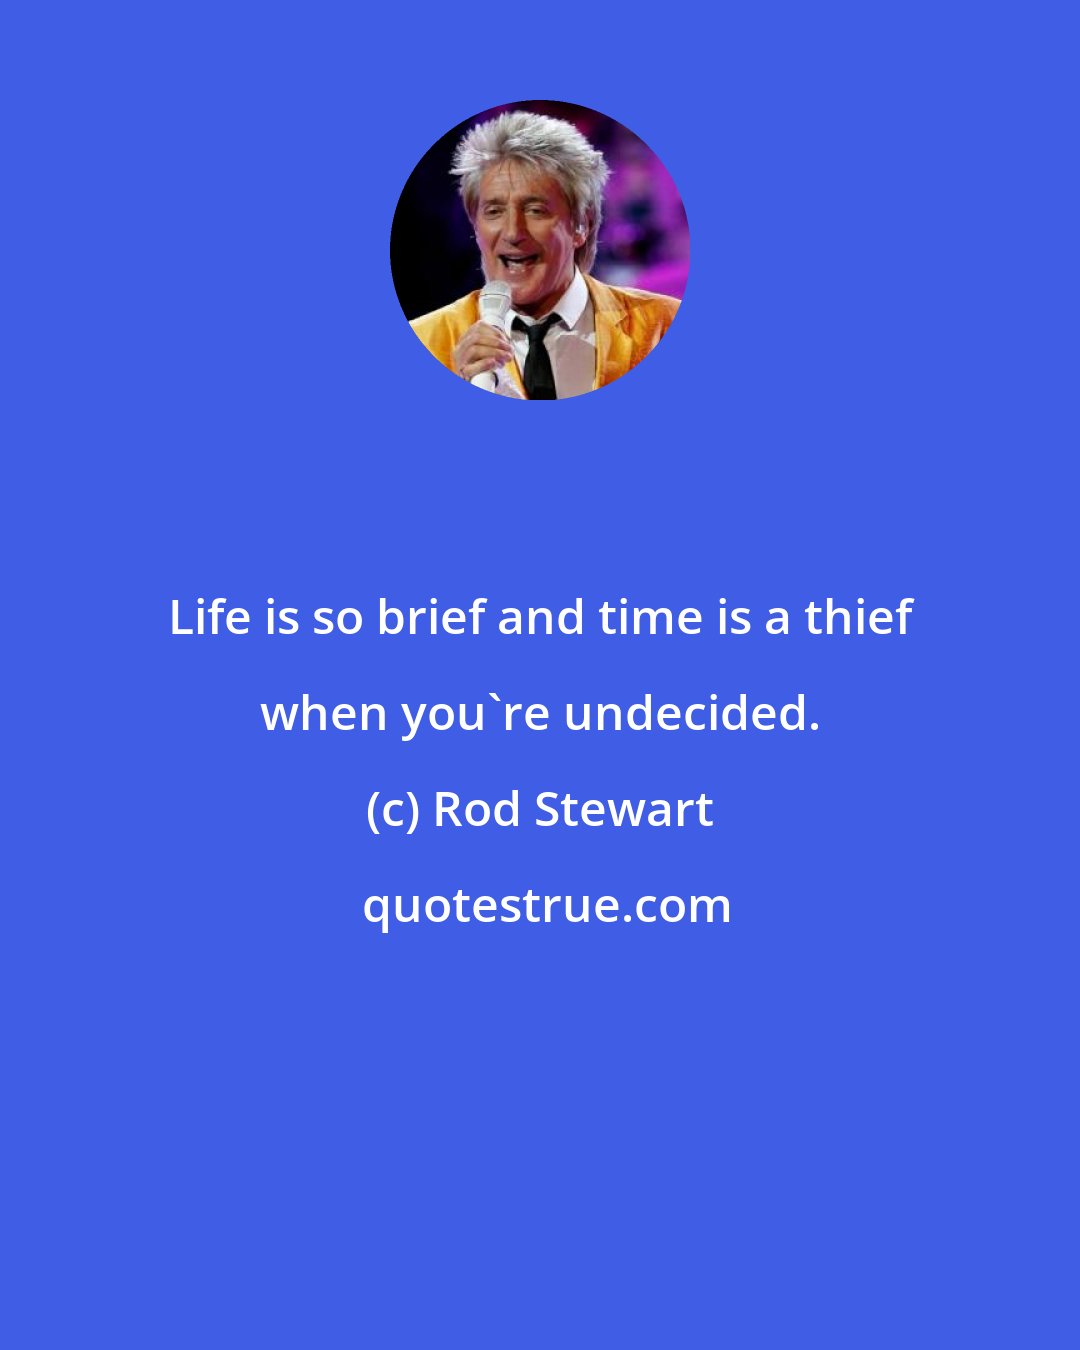 Rod Stewart: Life is so brief and time is a thief when you're undecided.